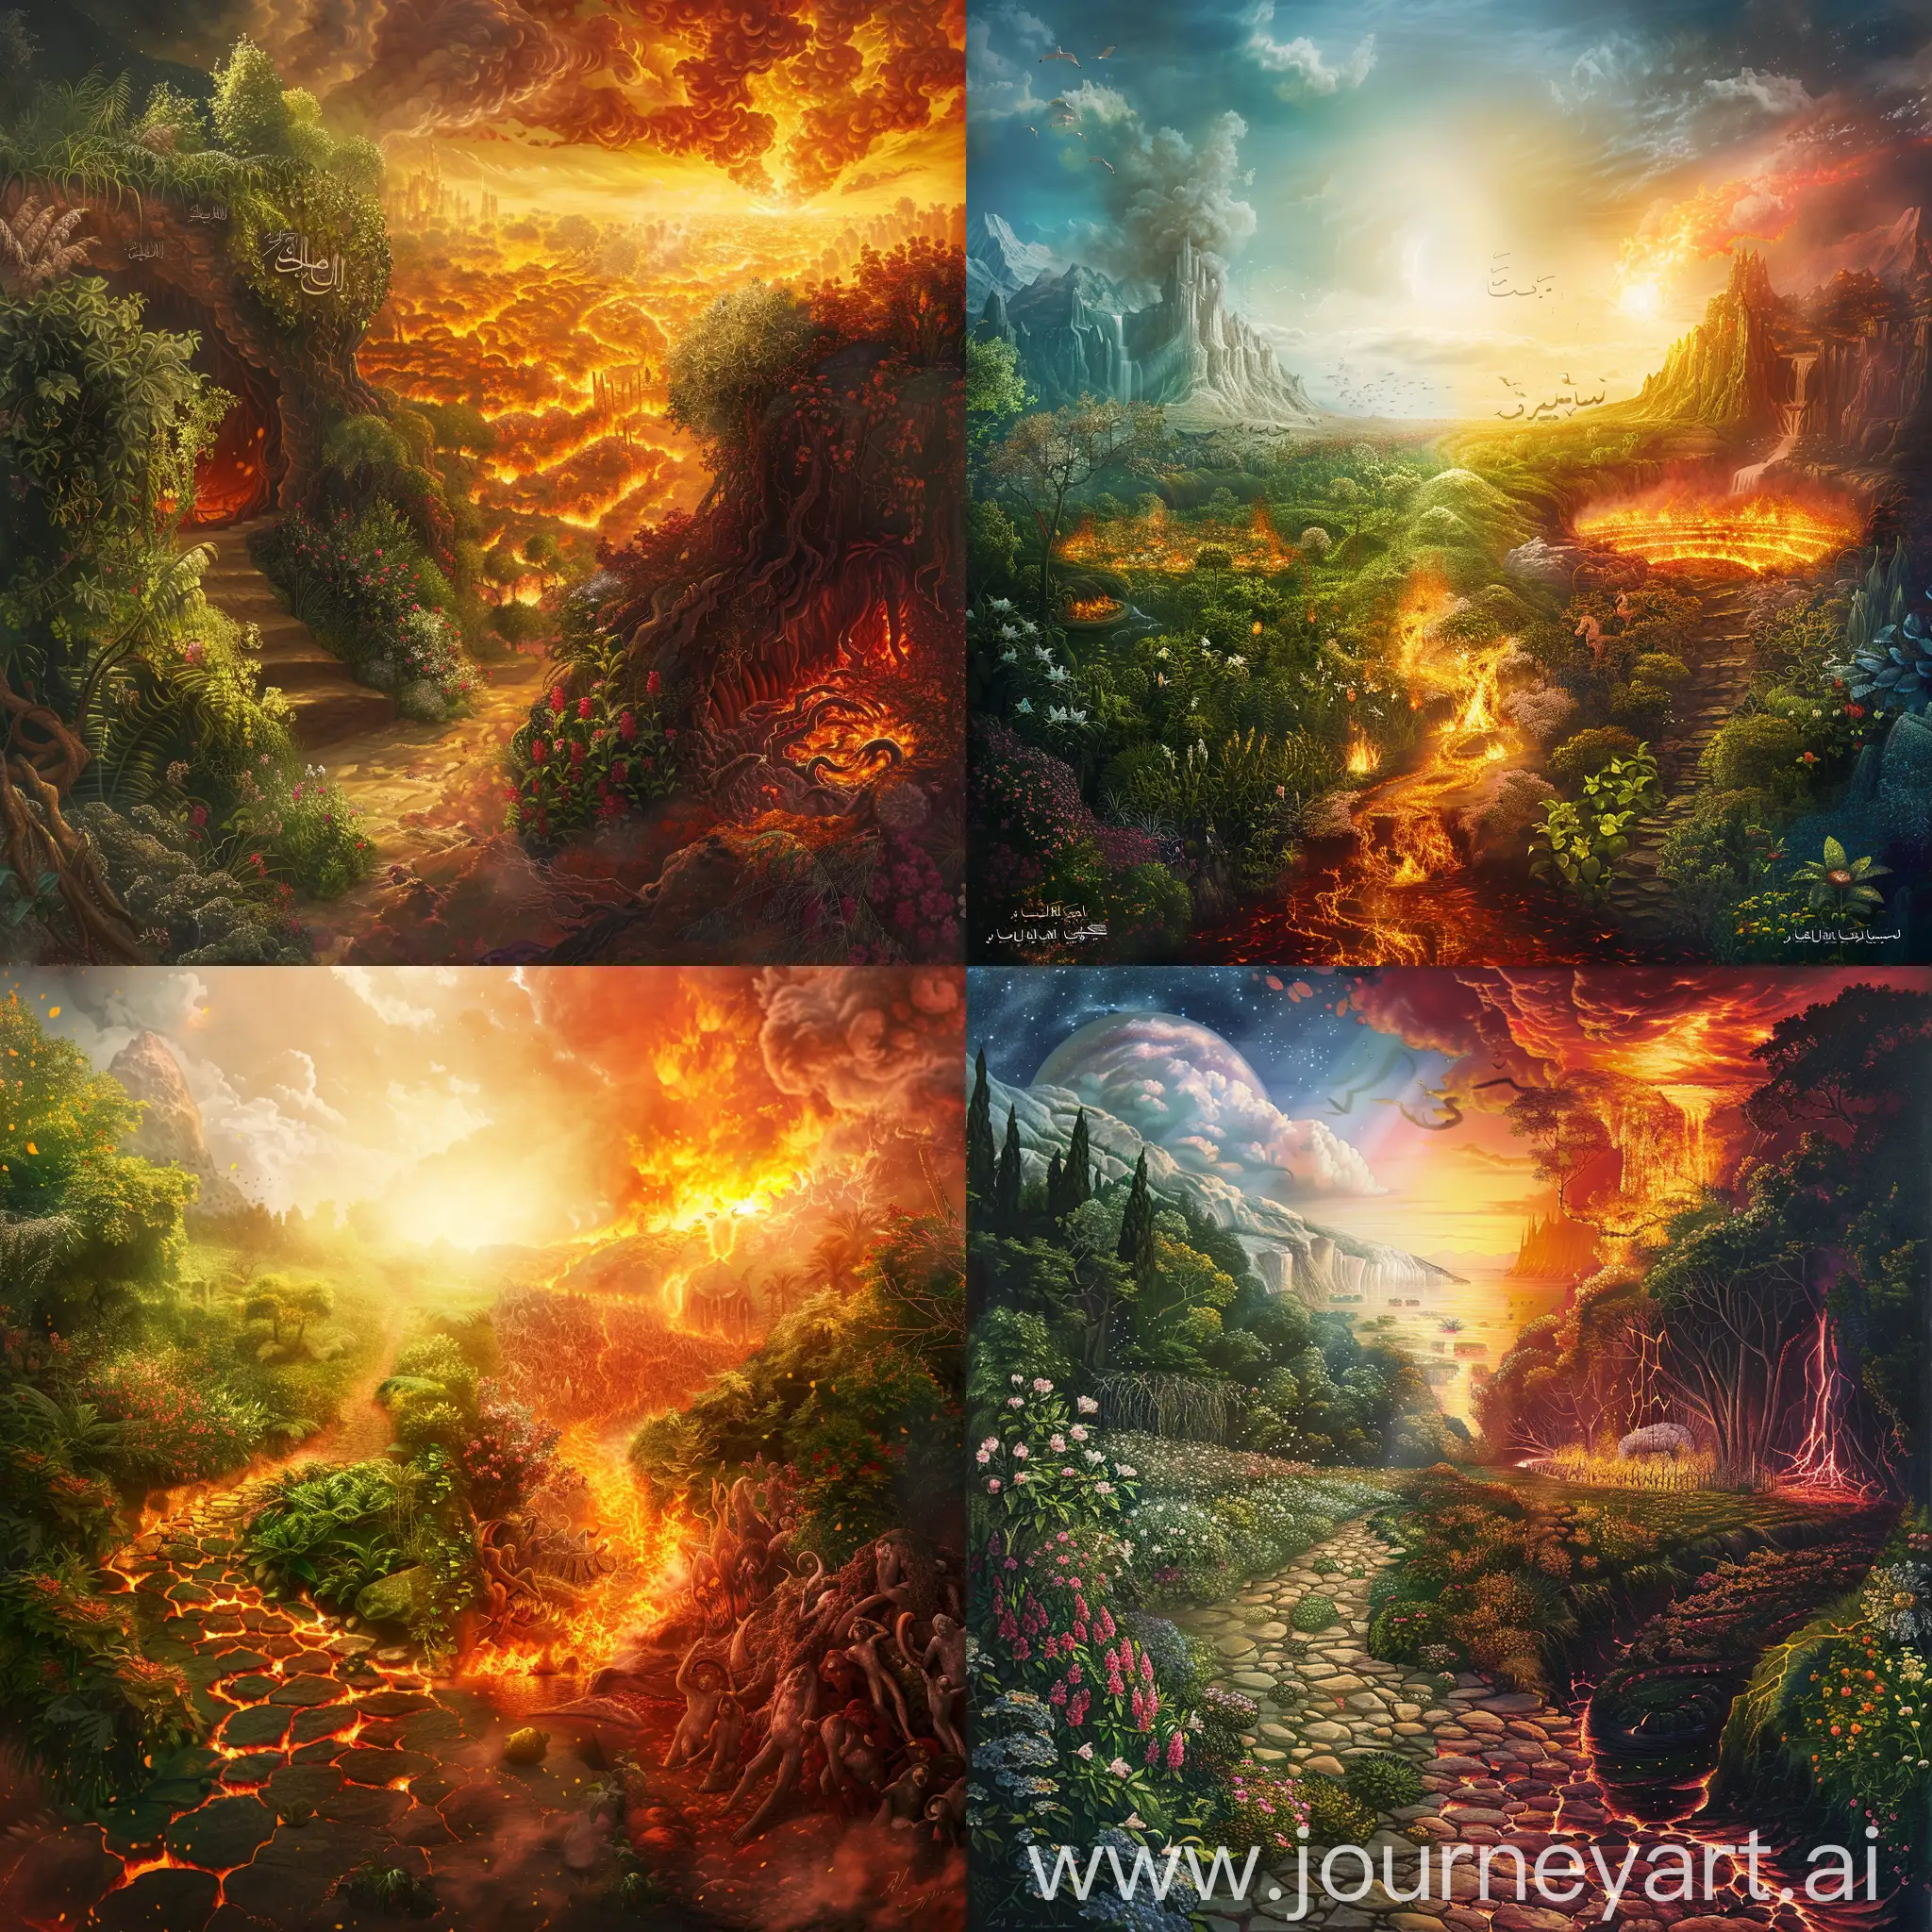 Generate contrasting images of Heaven and Hell inspired by Quranic verses. Illustrate the divine beauty and bliss of Heaven, with lush gardens and radiant light. Simultaneously, depict the ominous and tormenting nature of Hell, emphasizing fiery landscapes and consequences. Convey the emotional impact and spiritual journey as described in the Quran.